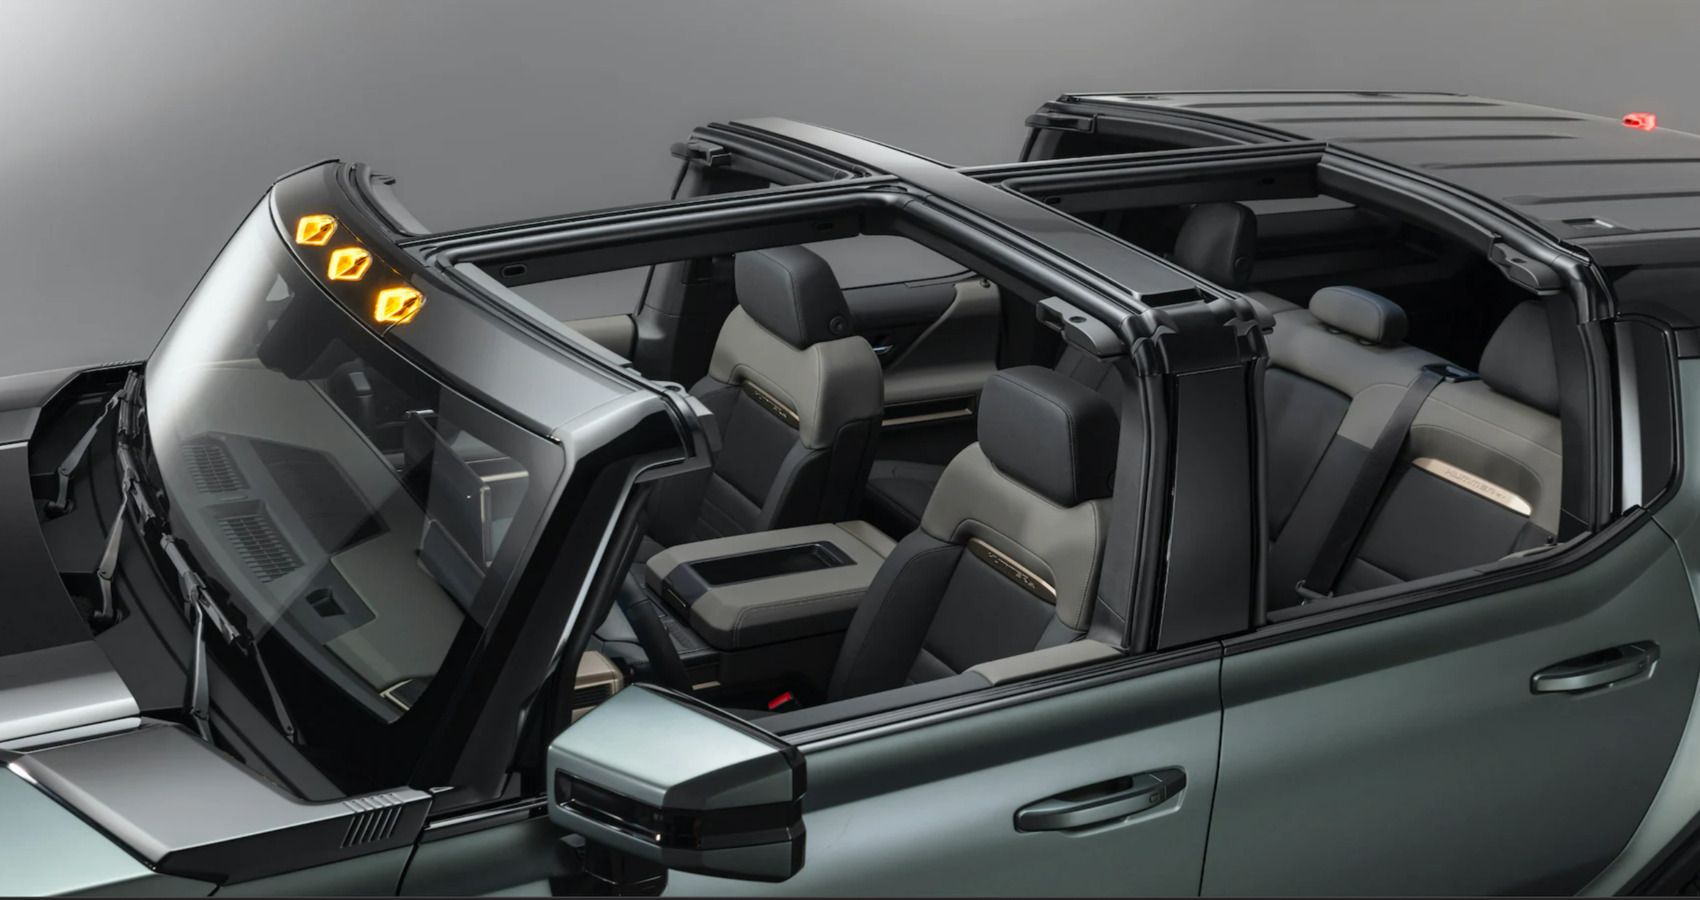 Let's Take A Look At The Interior Of The GMC Hummer EV